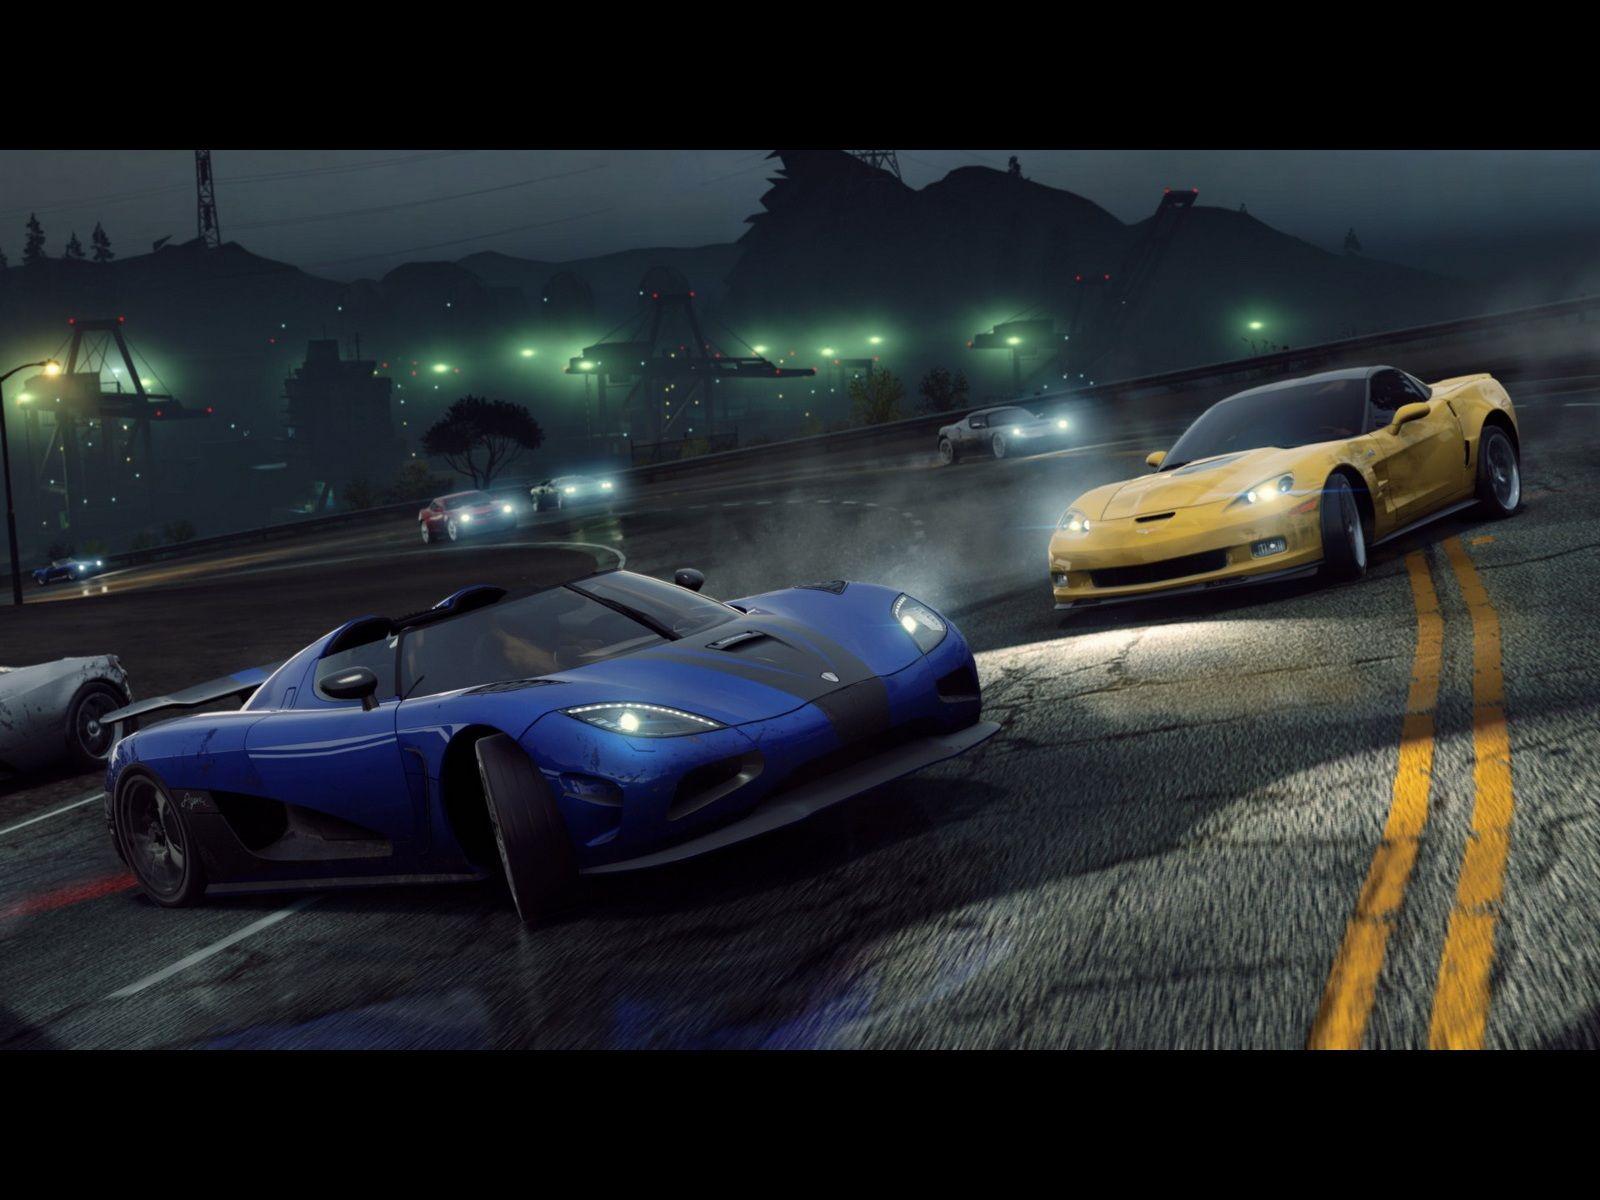 Need For Speed: Most Wanted Wallpaper 800x600. Need For Speed